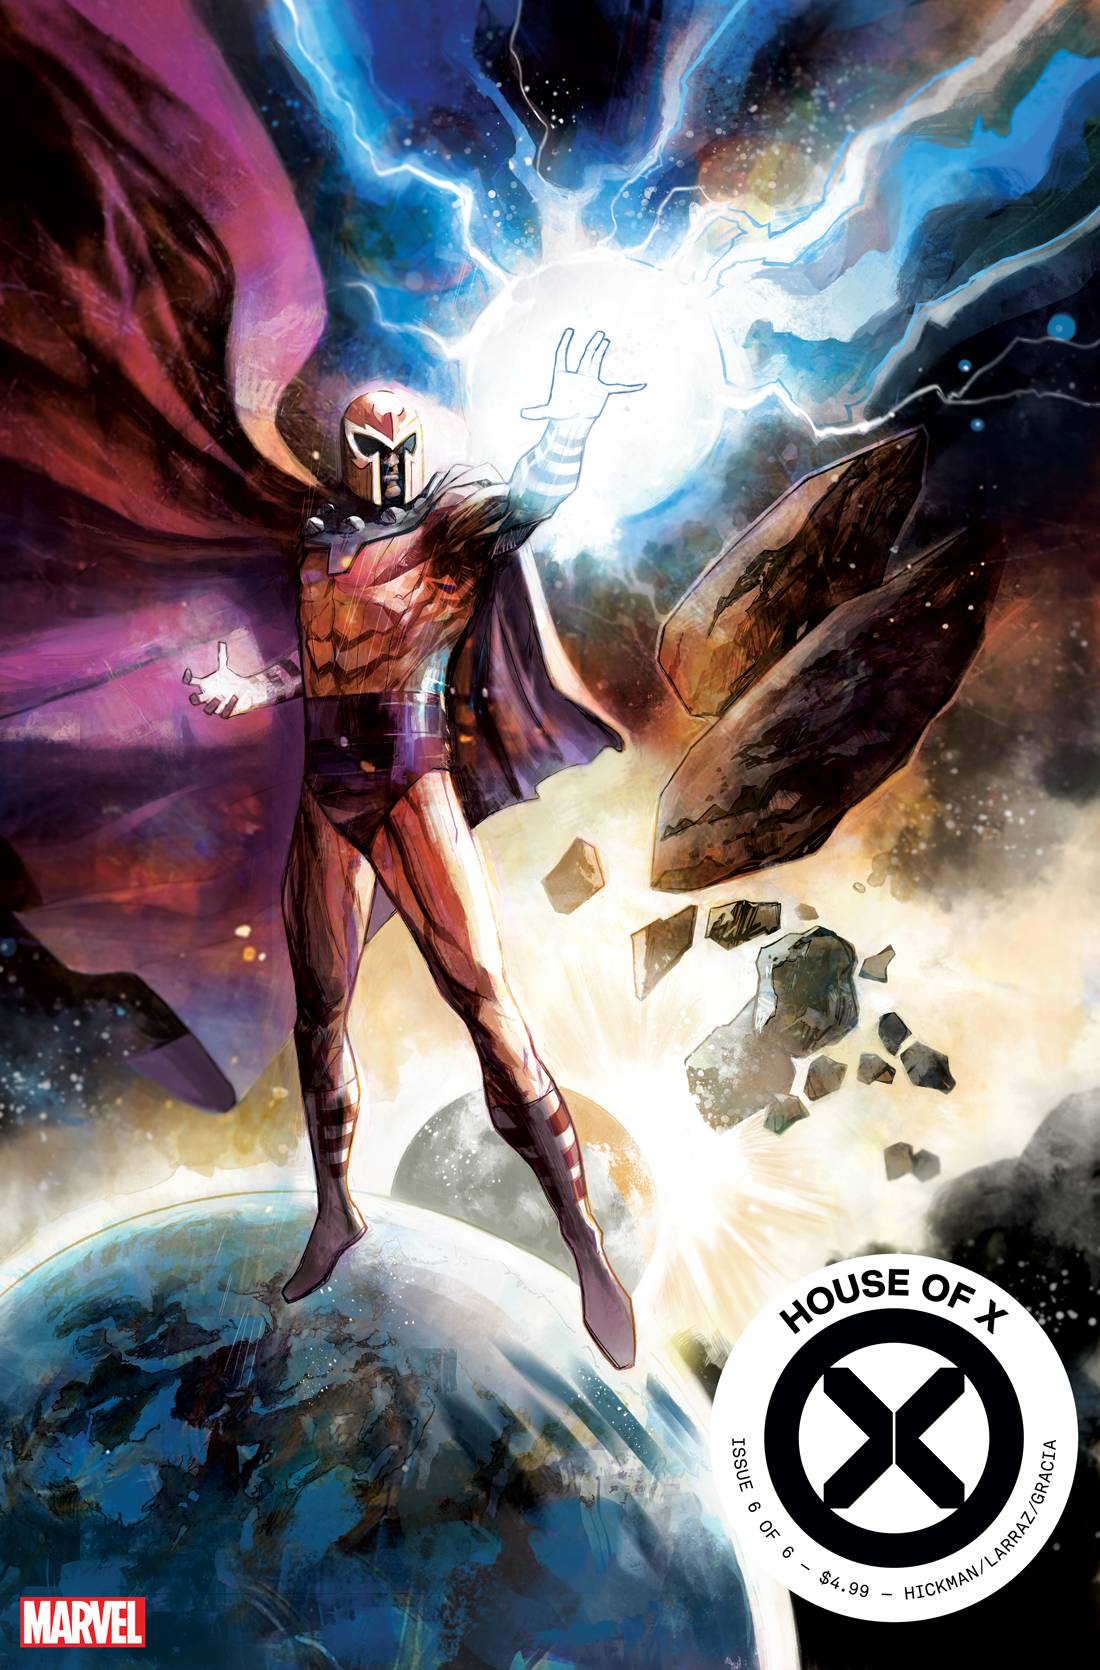 House of X #6 (of 6) - State of Comics